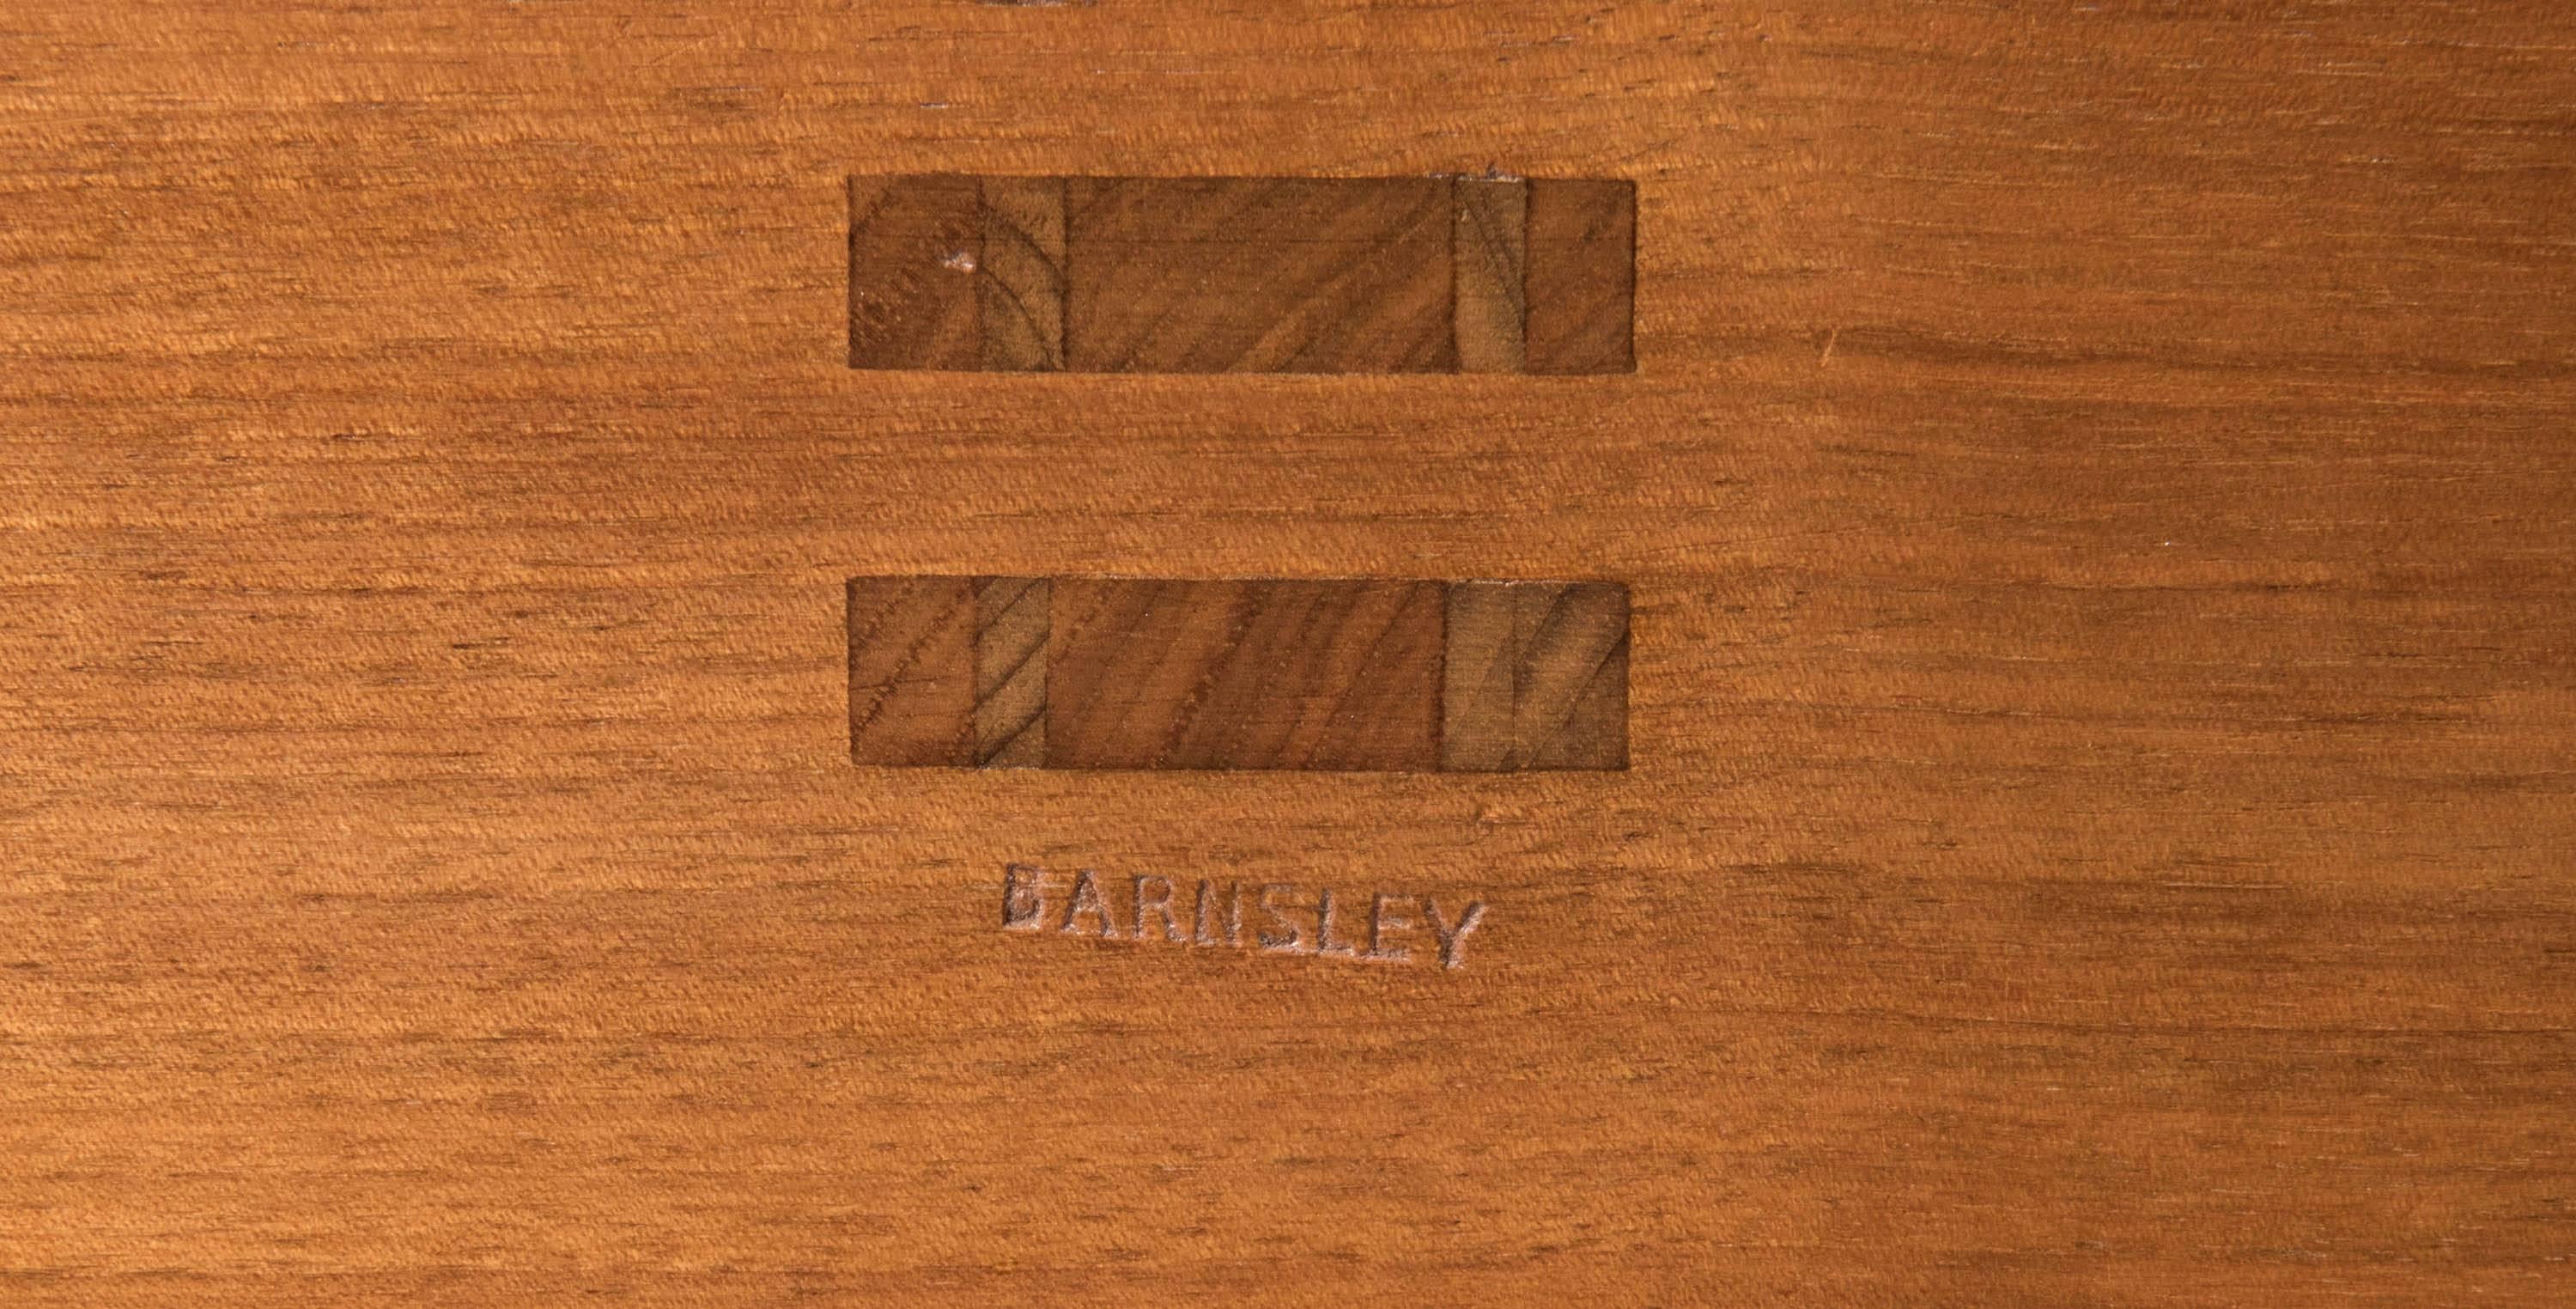 A lovely walnut dining table by Edward Barnsley of wishbone form.
The elliptical top quartered veneered.
Set with simple boxwood inlay bands
England
circa 1971
Stamped Barnsley
Made for a wedding present.
Measures: 230 cm wide x 108 cm wide x 74 cm